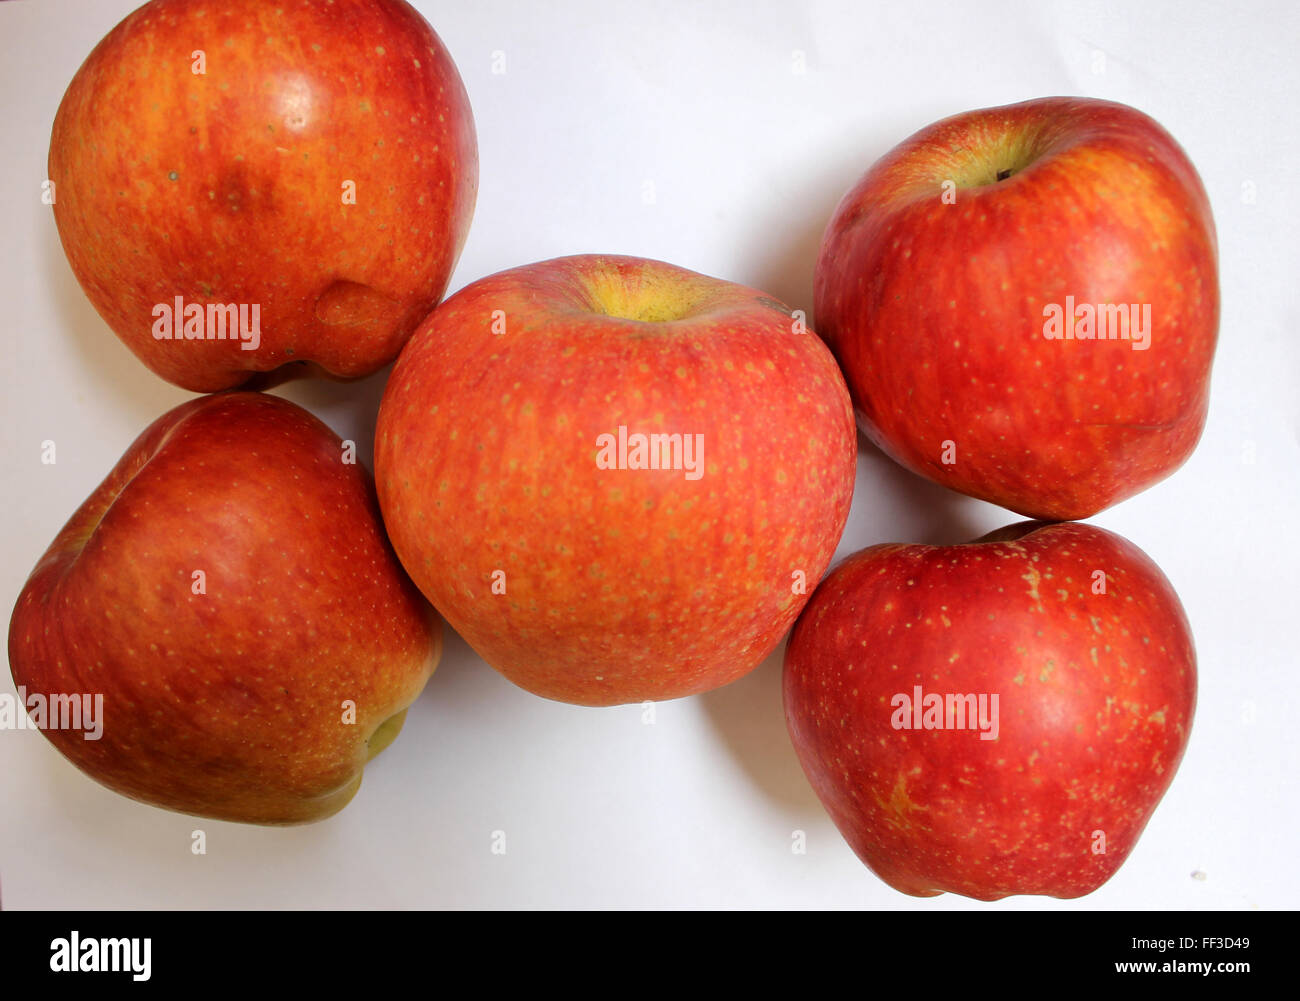 Kashmir delicious apple, Malus domestica, delicious fruit from Kashmir, India with pinkish to red fruits with pale dots. Stock Photo